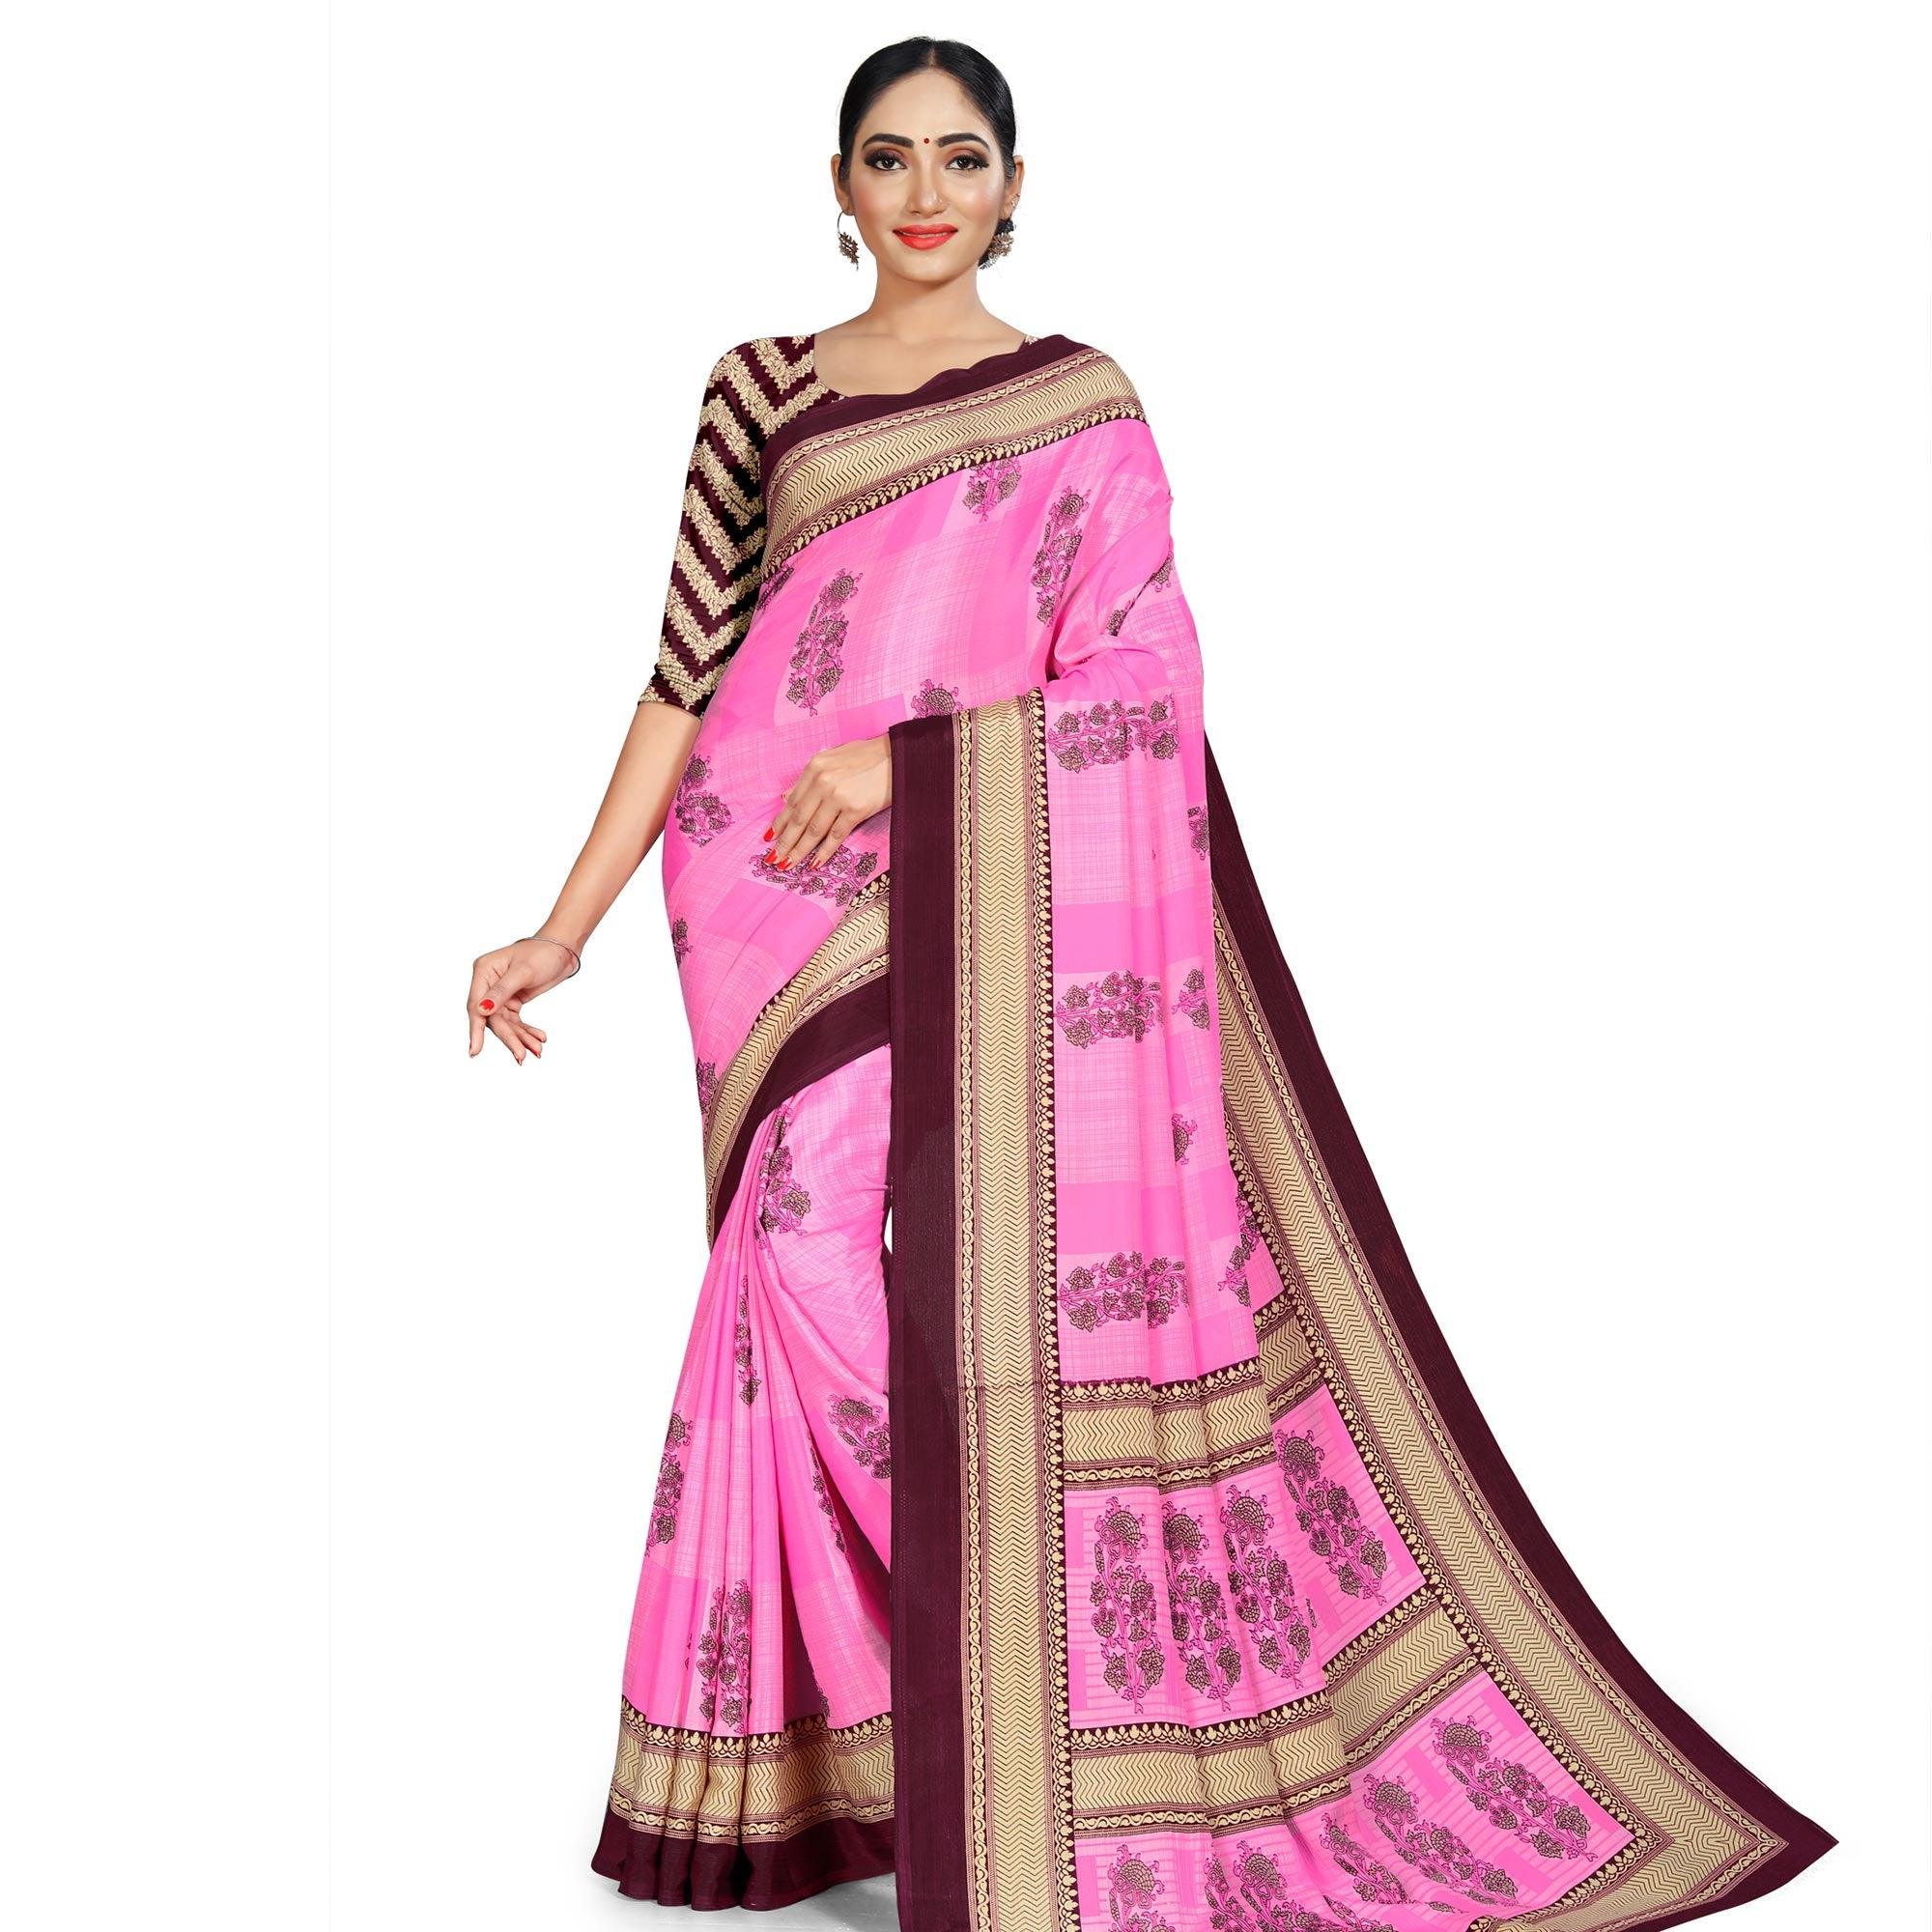 Radiant Pink Colored Casual Wear Printed Crepe Saree - Peachmode